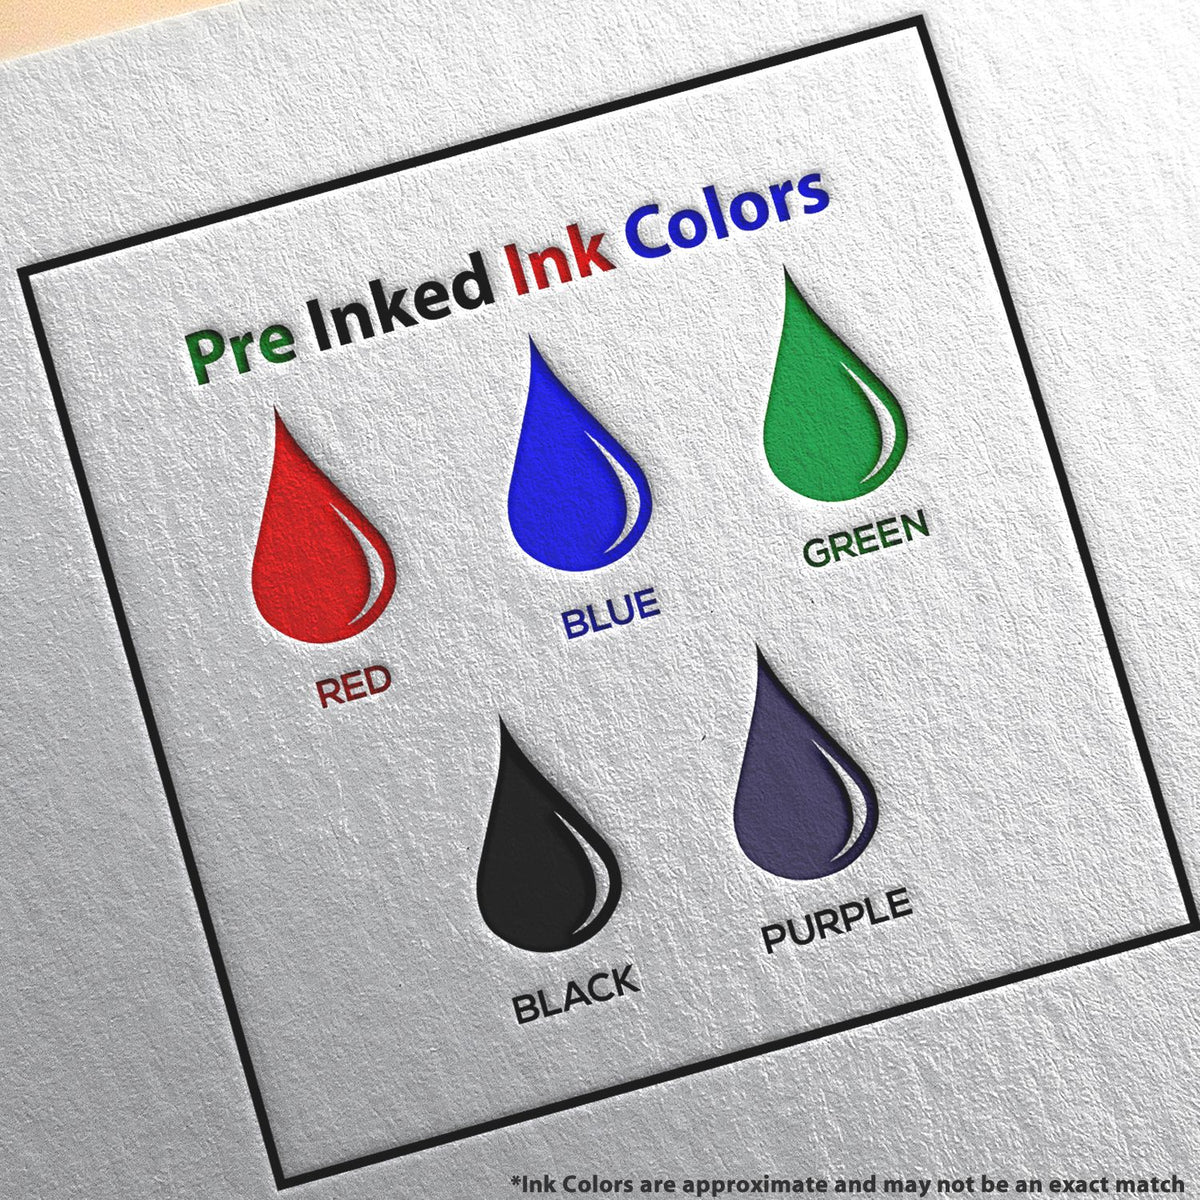 A picture showing the different ink colors or hues available for the Slim Pre-Inked Oklahoma Professional Engineer Seal Stamp product.